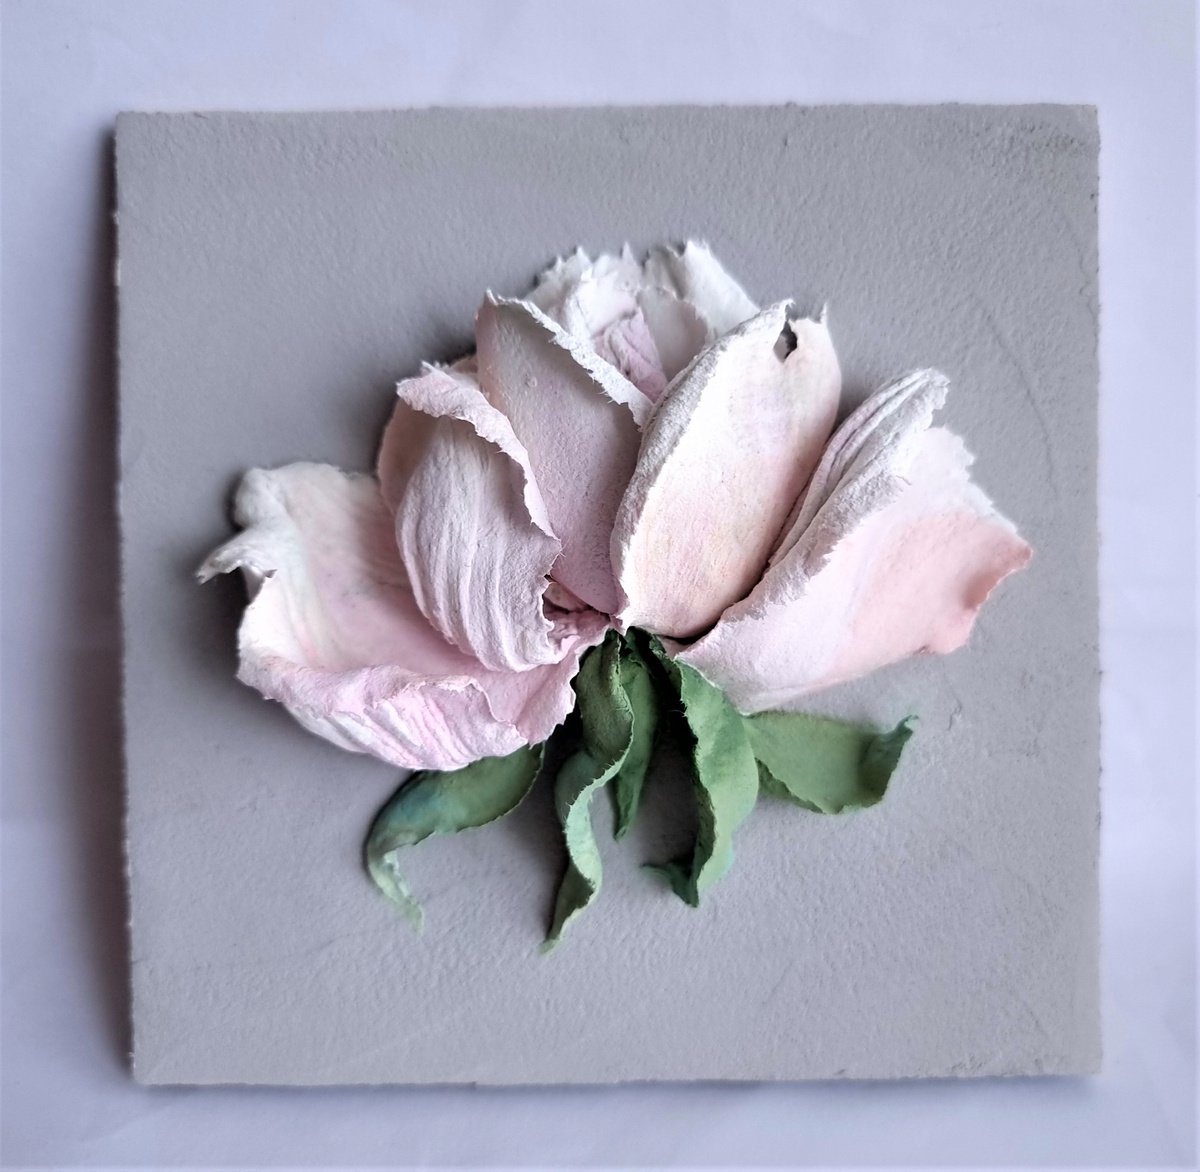 Small relief flower painting with white-pink rose on a grey backgroud. The Rose #2. 13.5x1... by Irina Stepanova